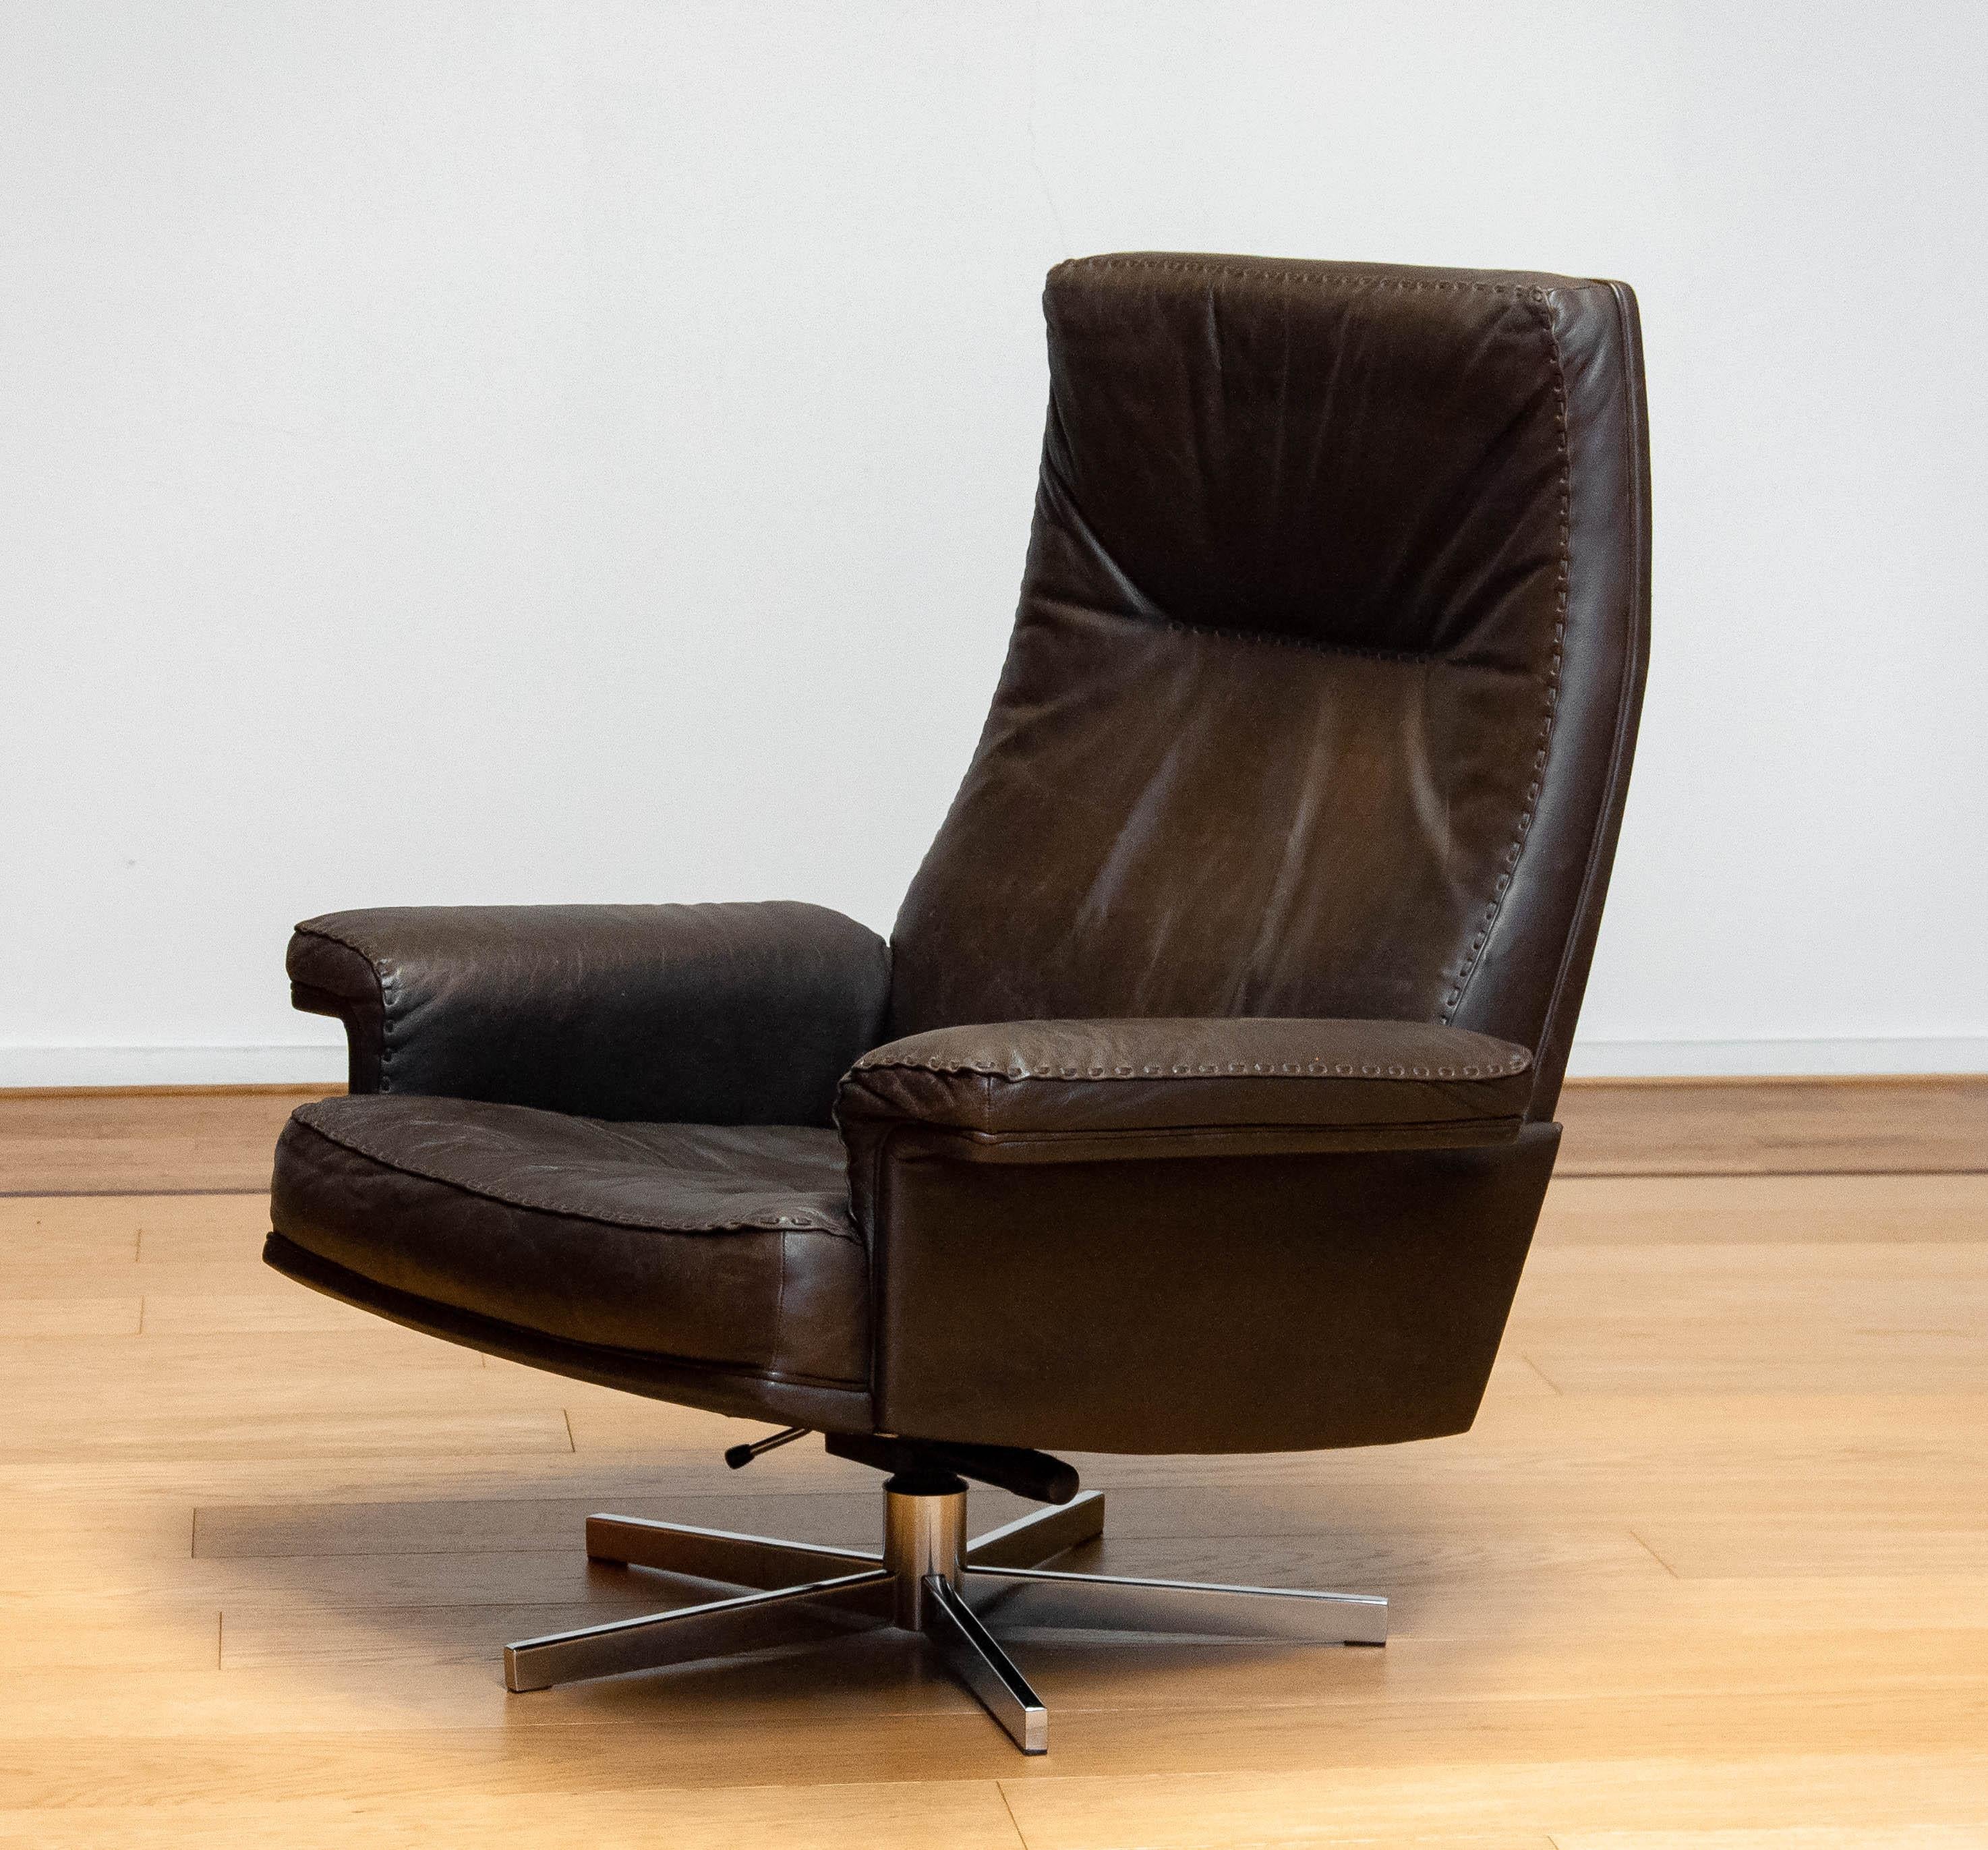 Brutalist 1970s Handstitched Brown Leather Swivel Chair with Chrome Base by De Sede DS-35